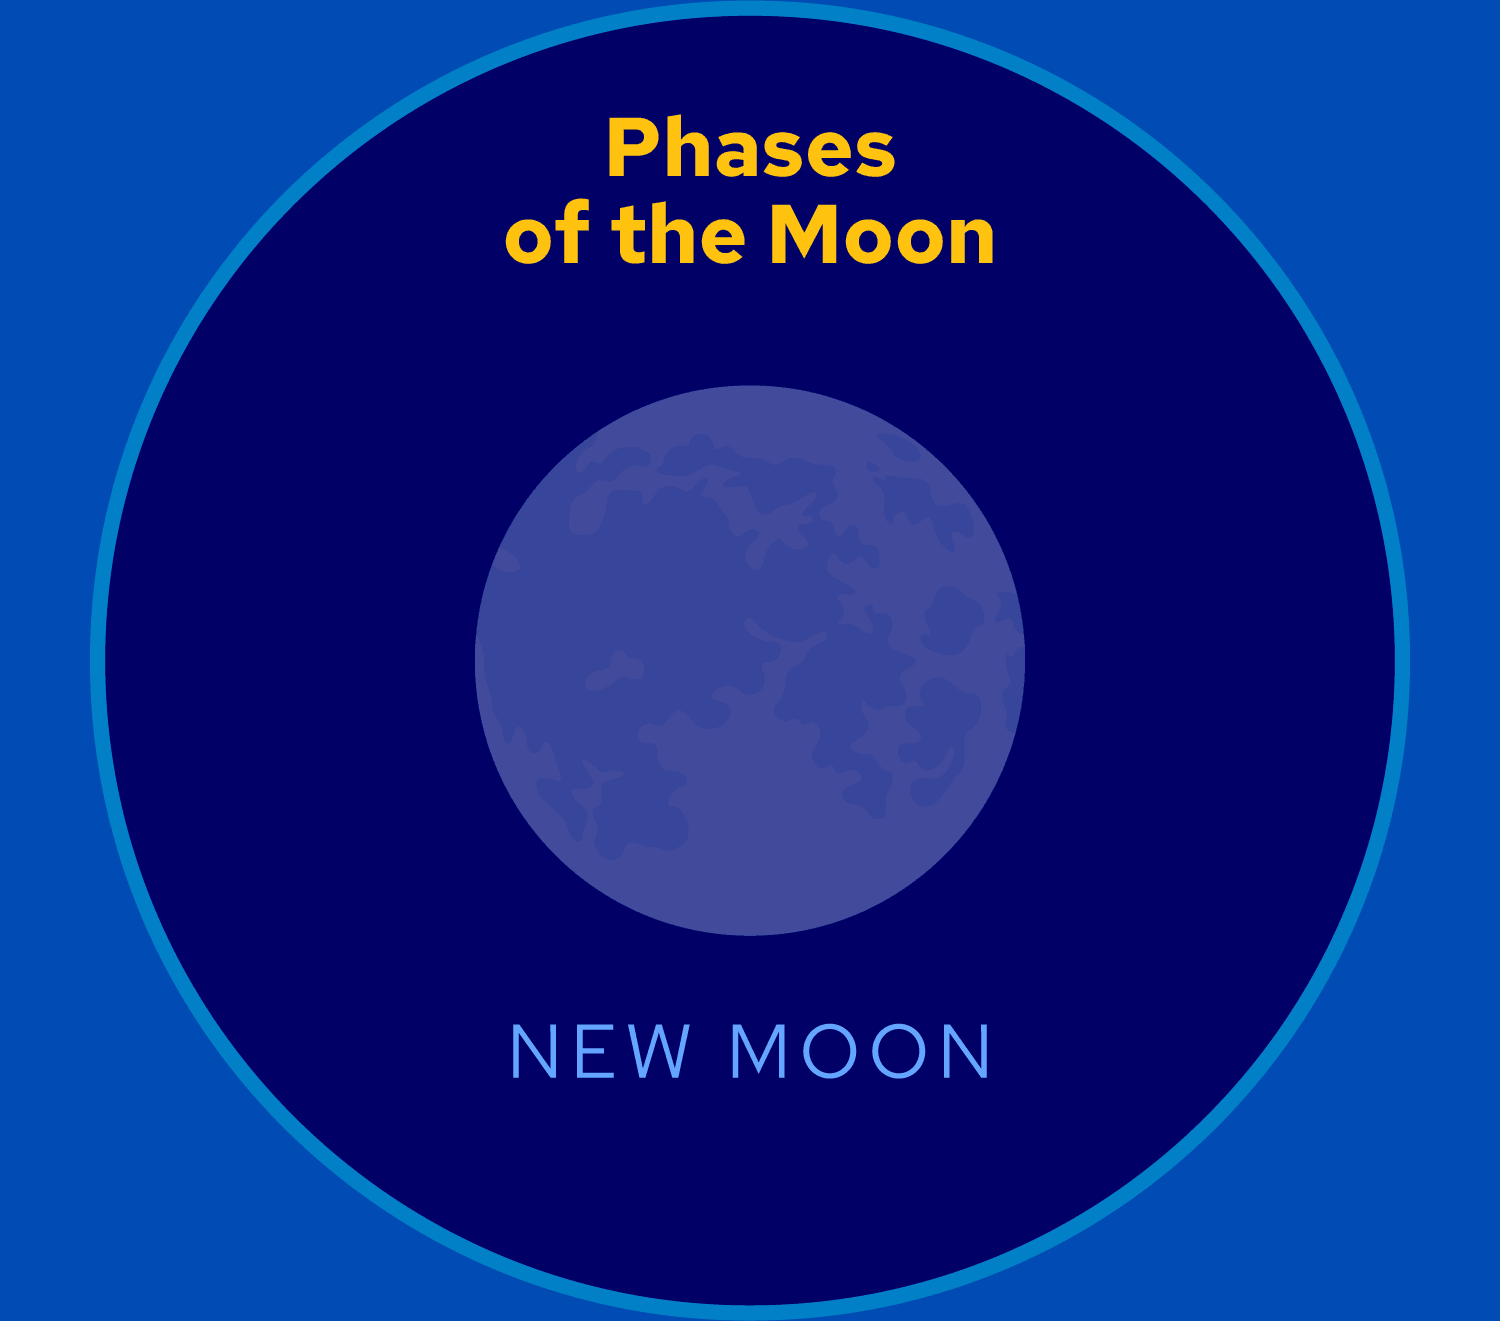 Animation showing eight phases of the moon.